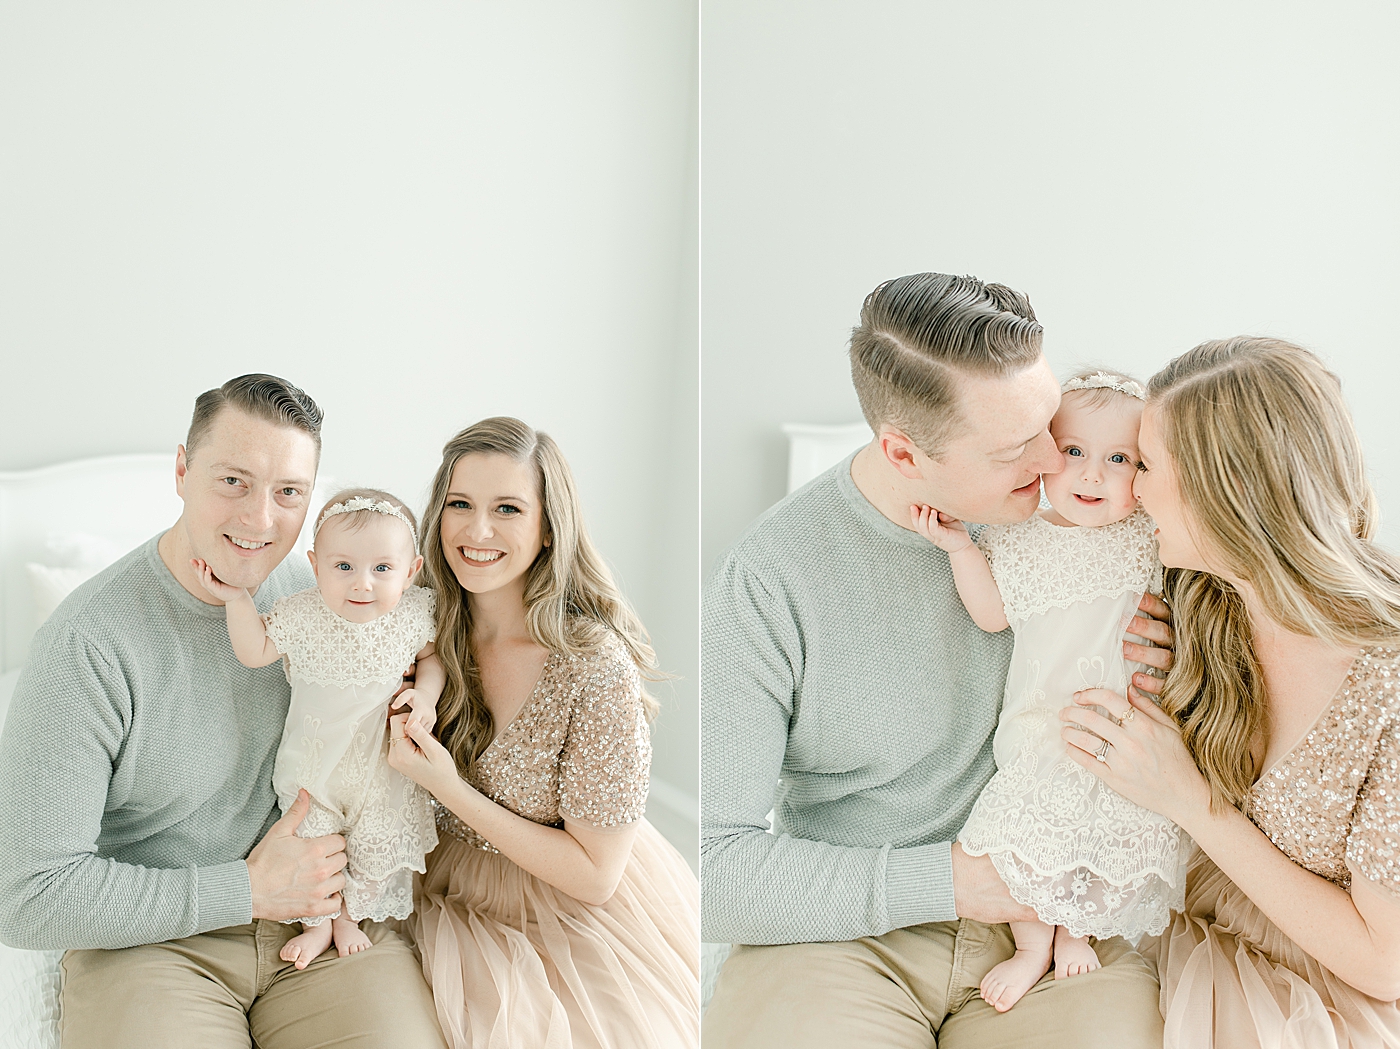 Mom and dad snuggling with their baby girl | Photo by Little Sunshine Photography